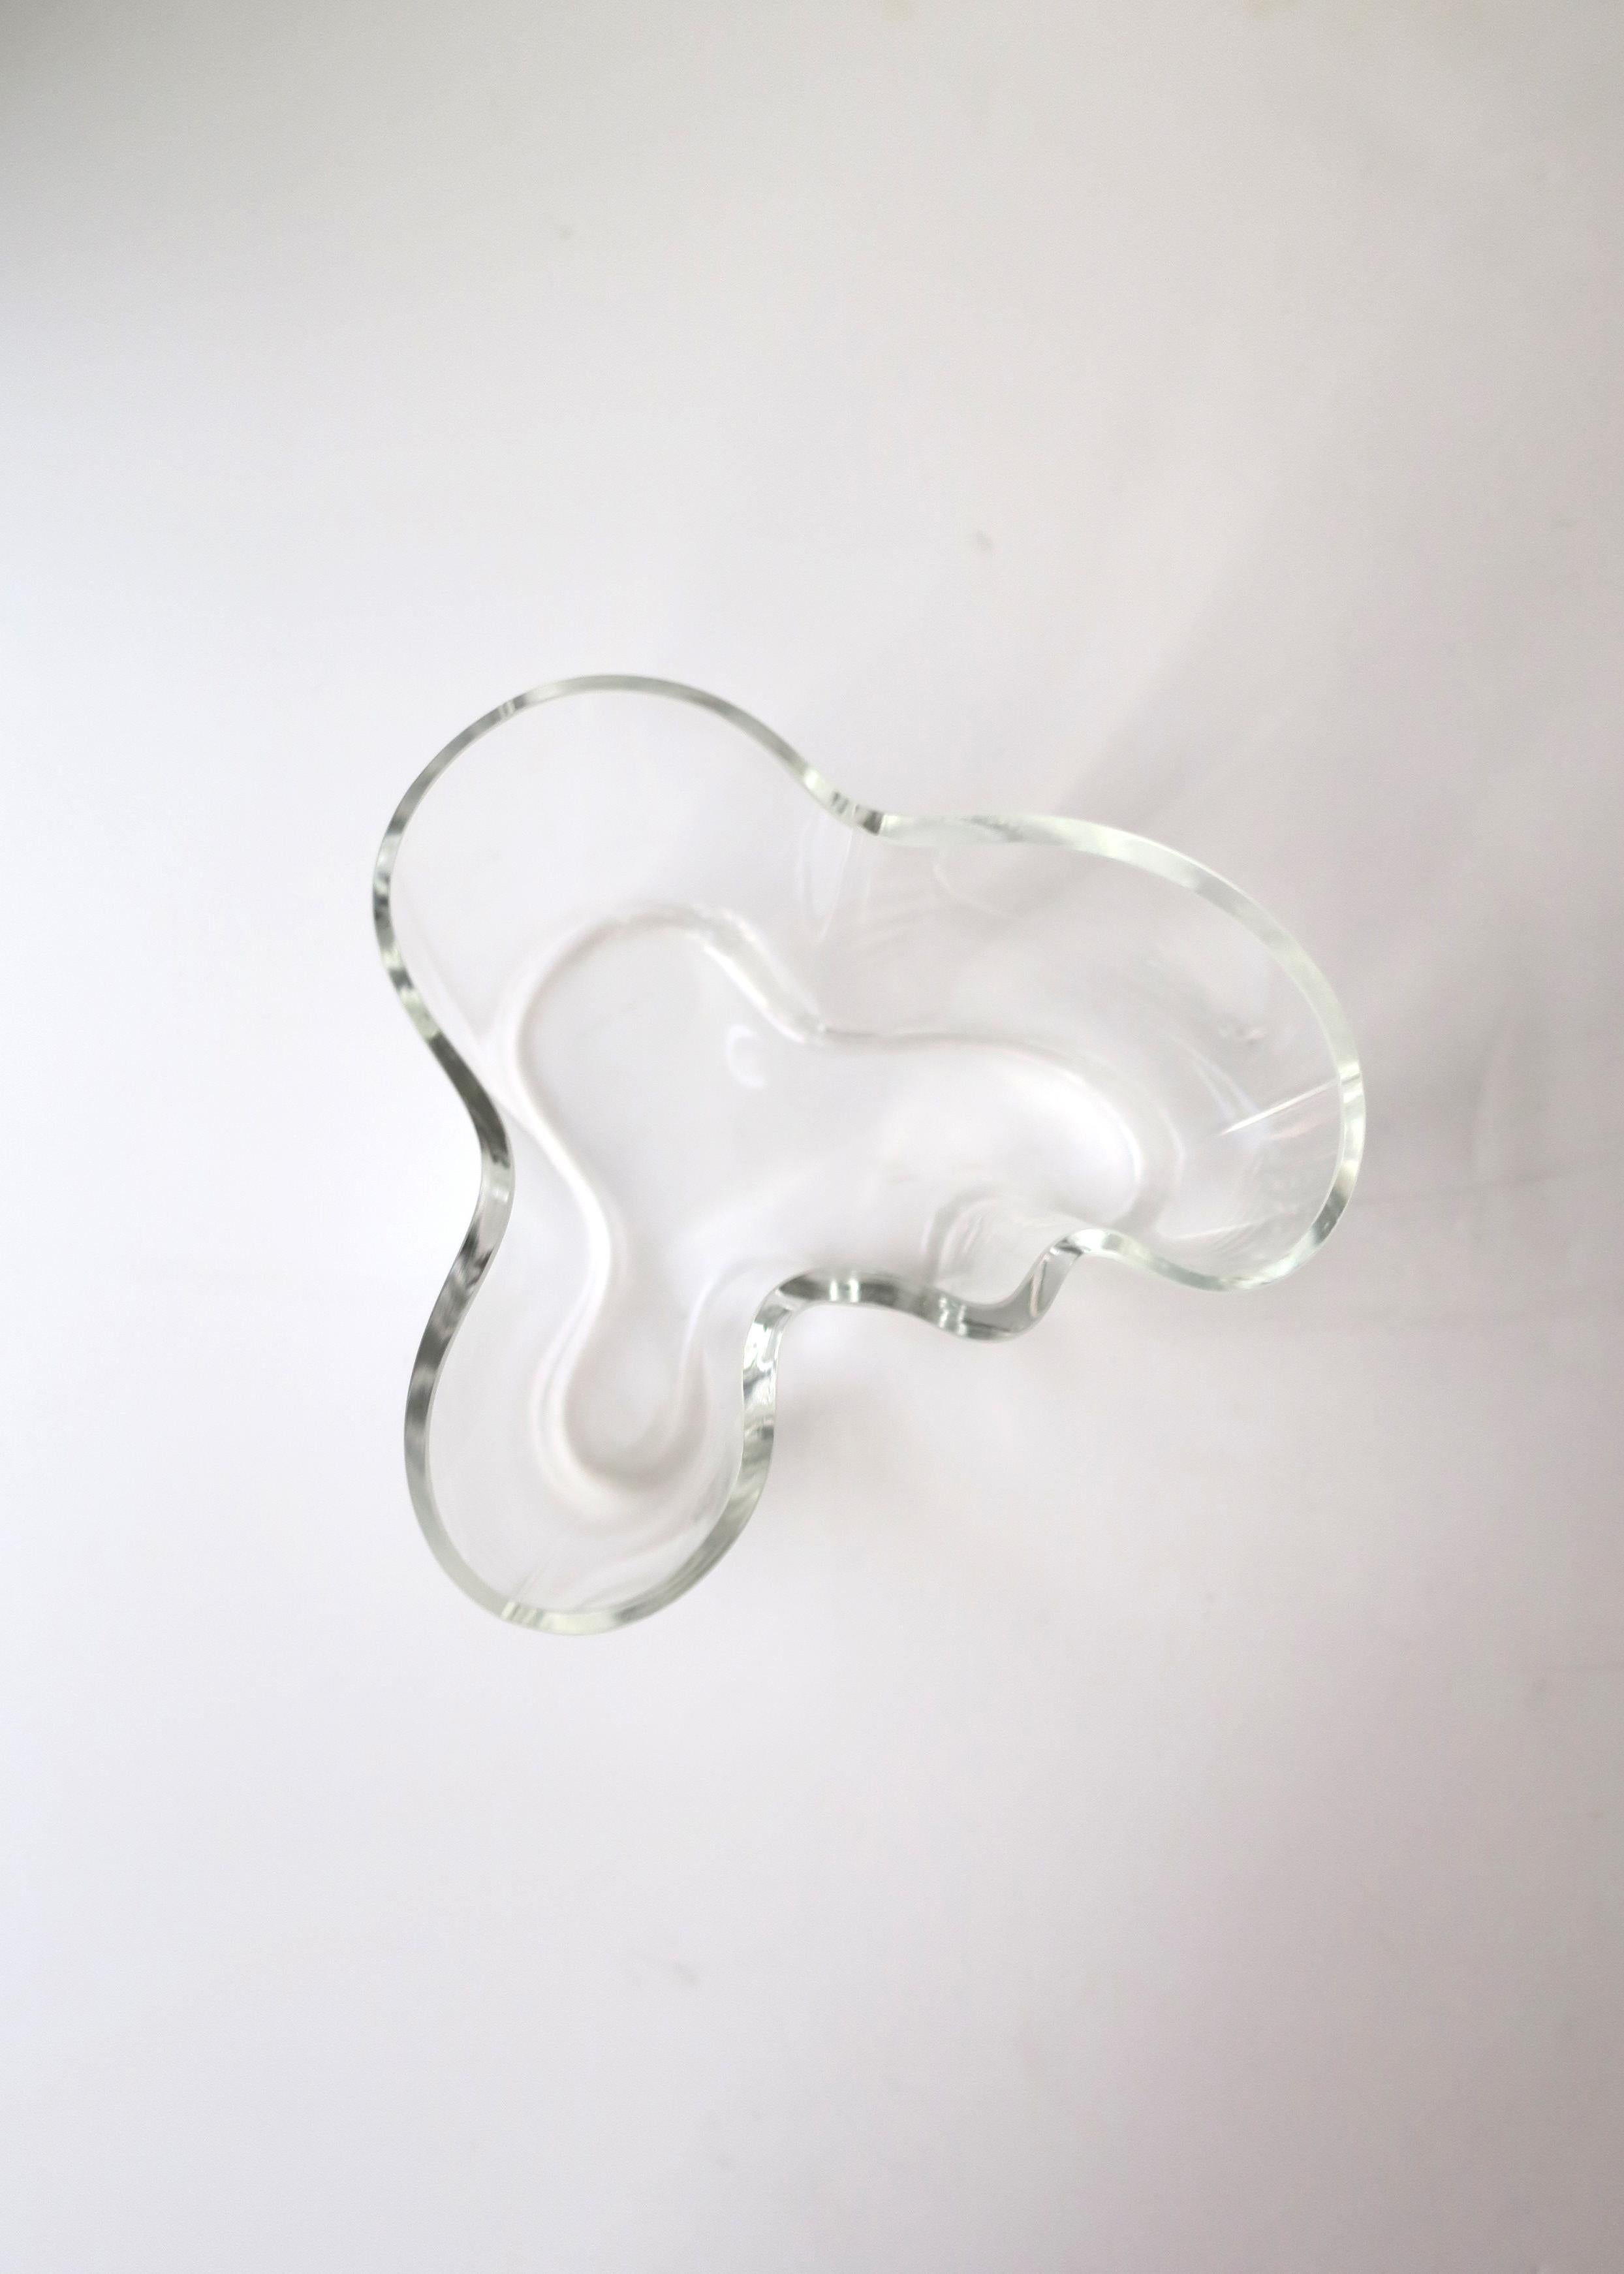 The beautiful and iconic Scandinavian Modern Alvar Aalto glass vase, aka as the 'Savoy' vase, created by designer Alvar Aalto, 1937, Finland. This clear vase, with original design by Alvar Aalto, for Finish company Iittala, is late-20th century,